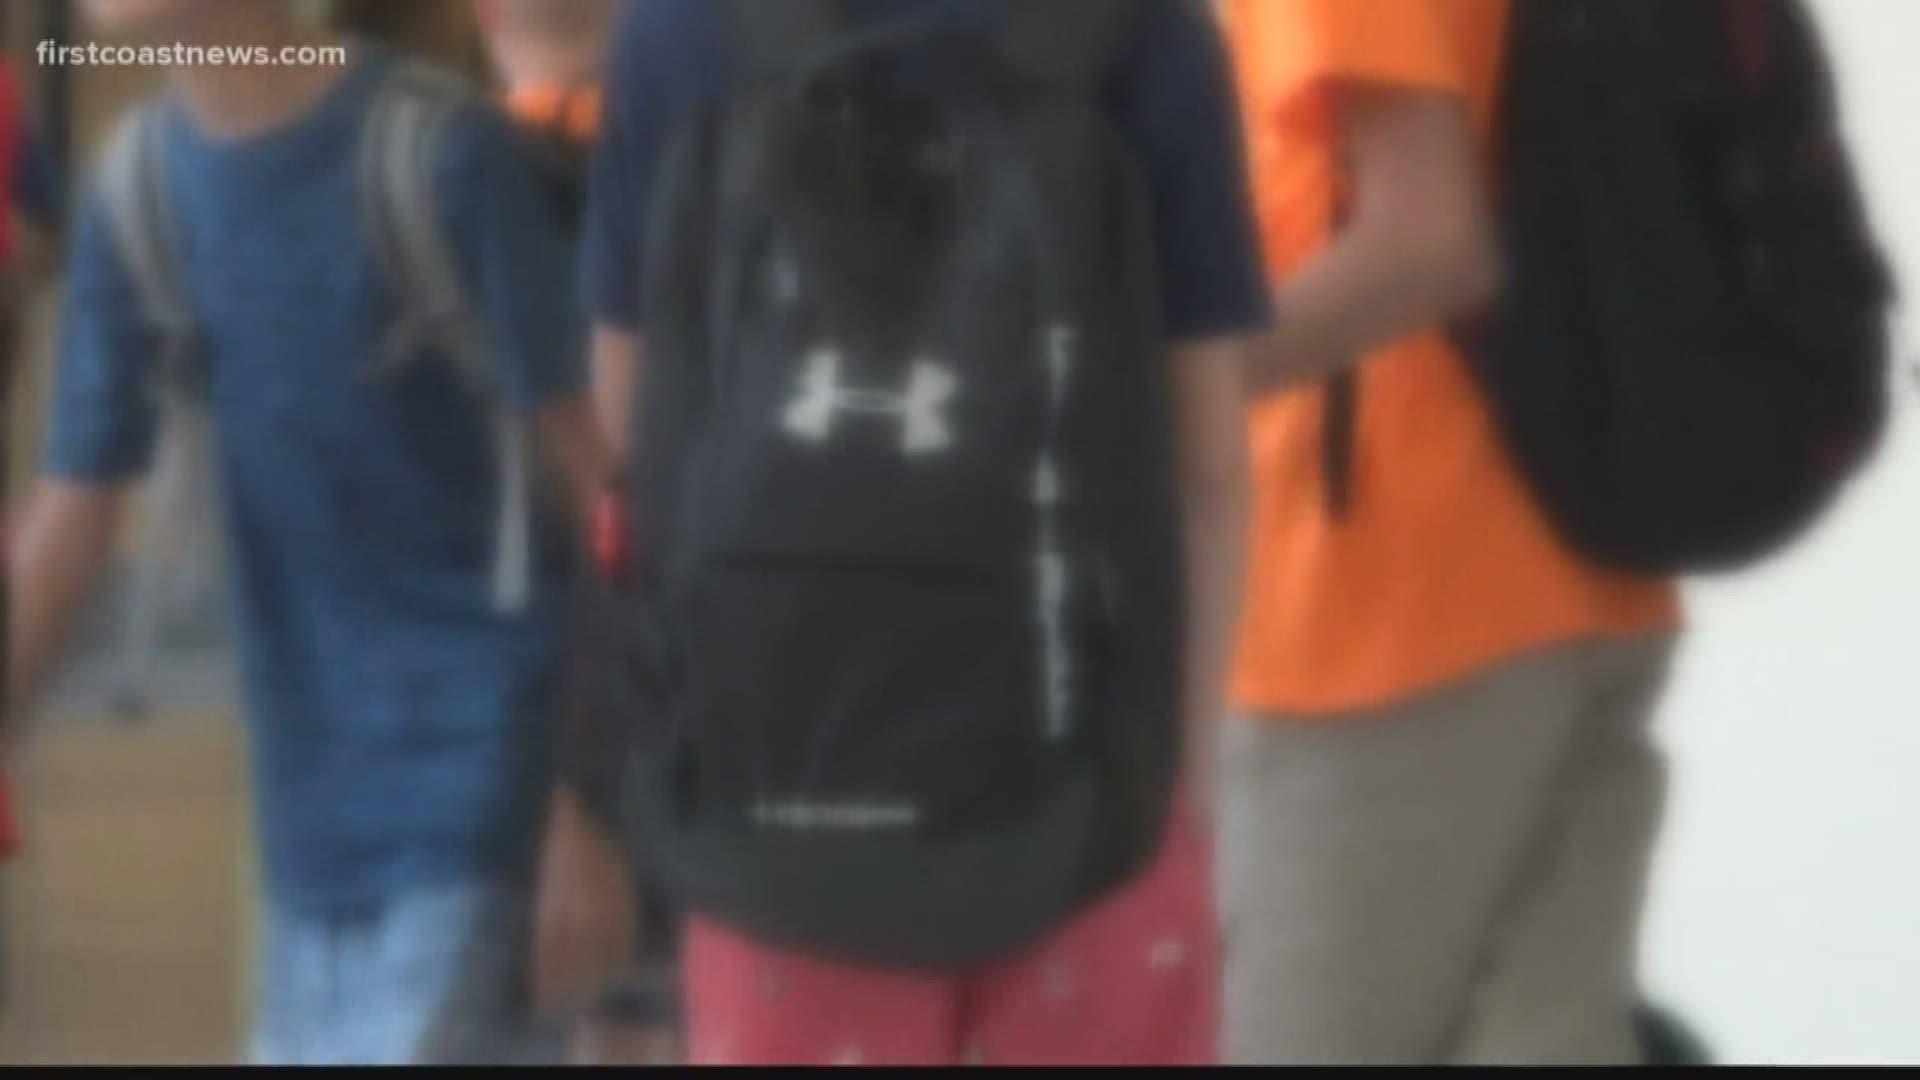 A stomach bug at Creekside High School concerned many parents last week, but the St. Johns County School District said attendance is "back to normal" Monday.